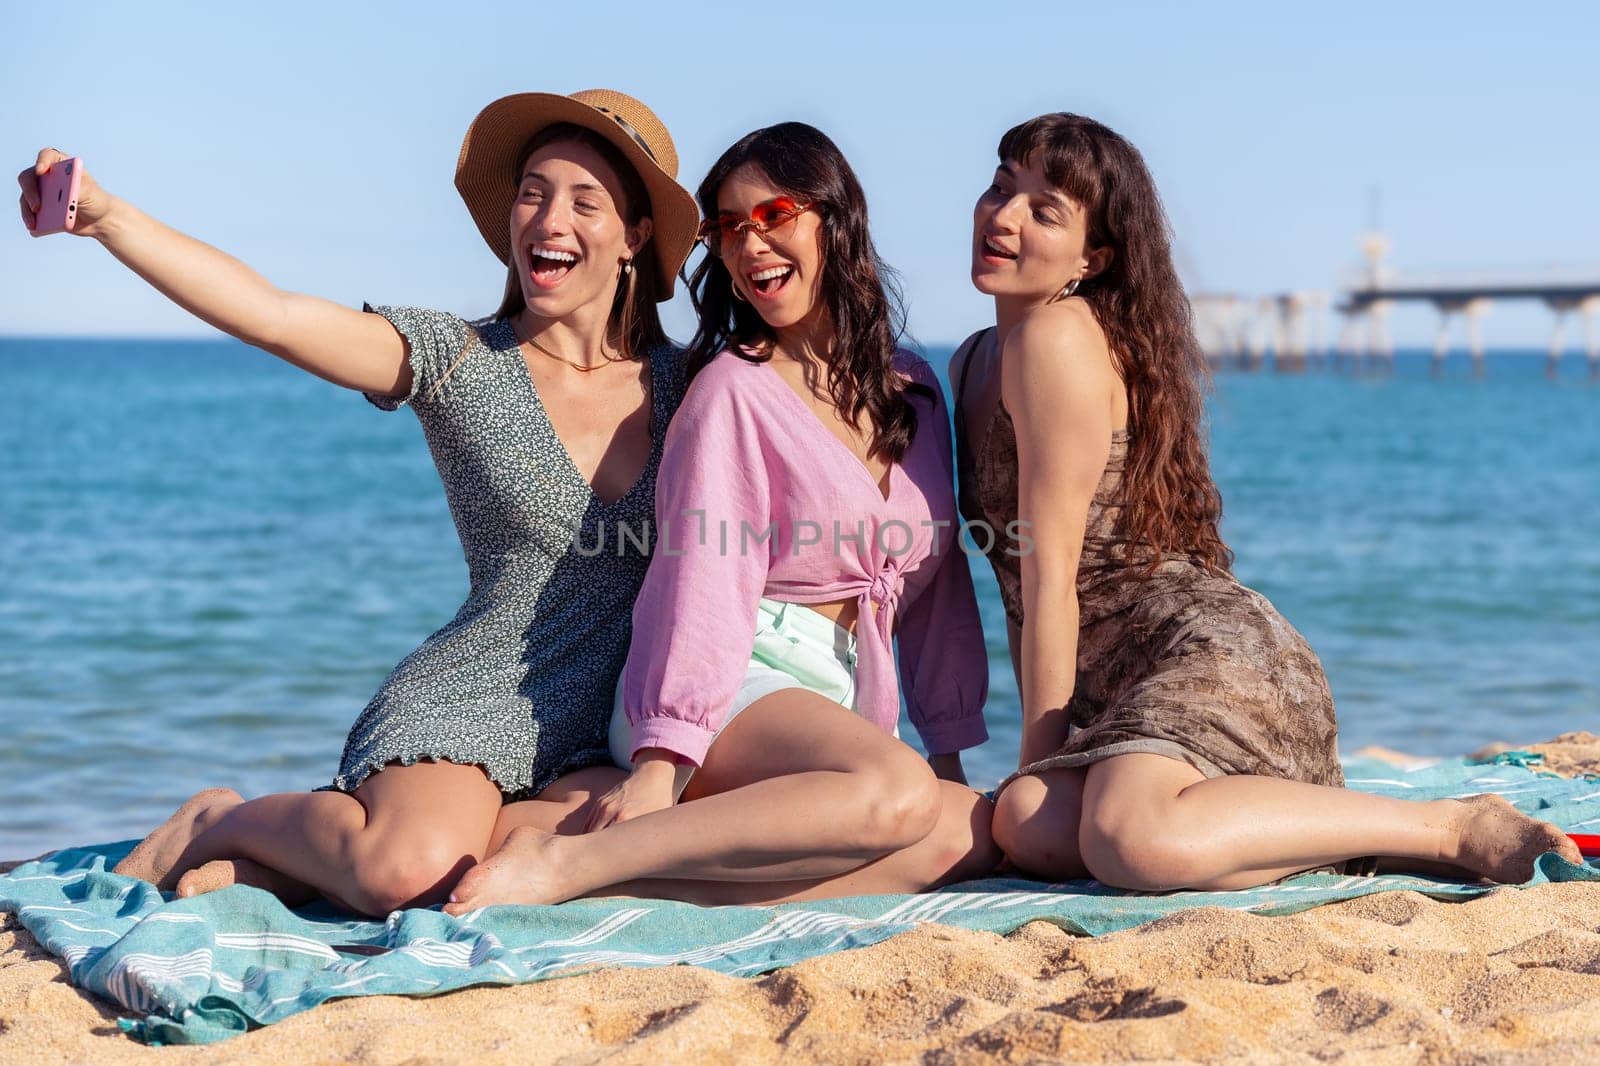 Group of smiling multiethnic women enjoying vacation. Beautiful and cheerful girls of generation z pose for a photo with a mobile phone.